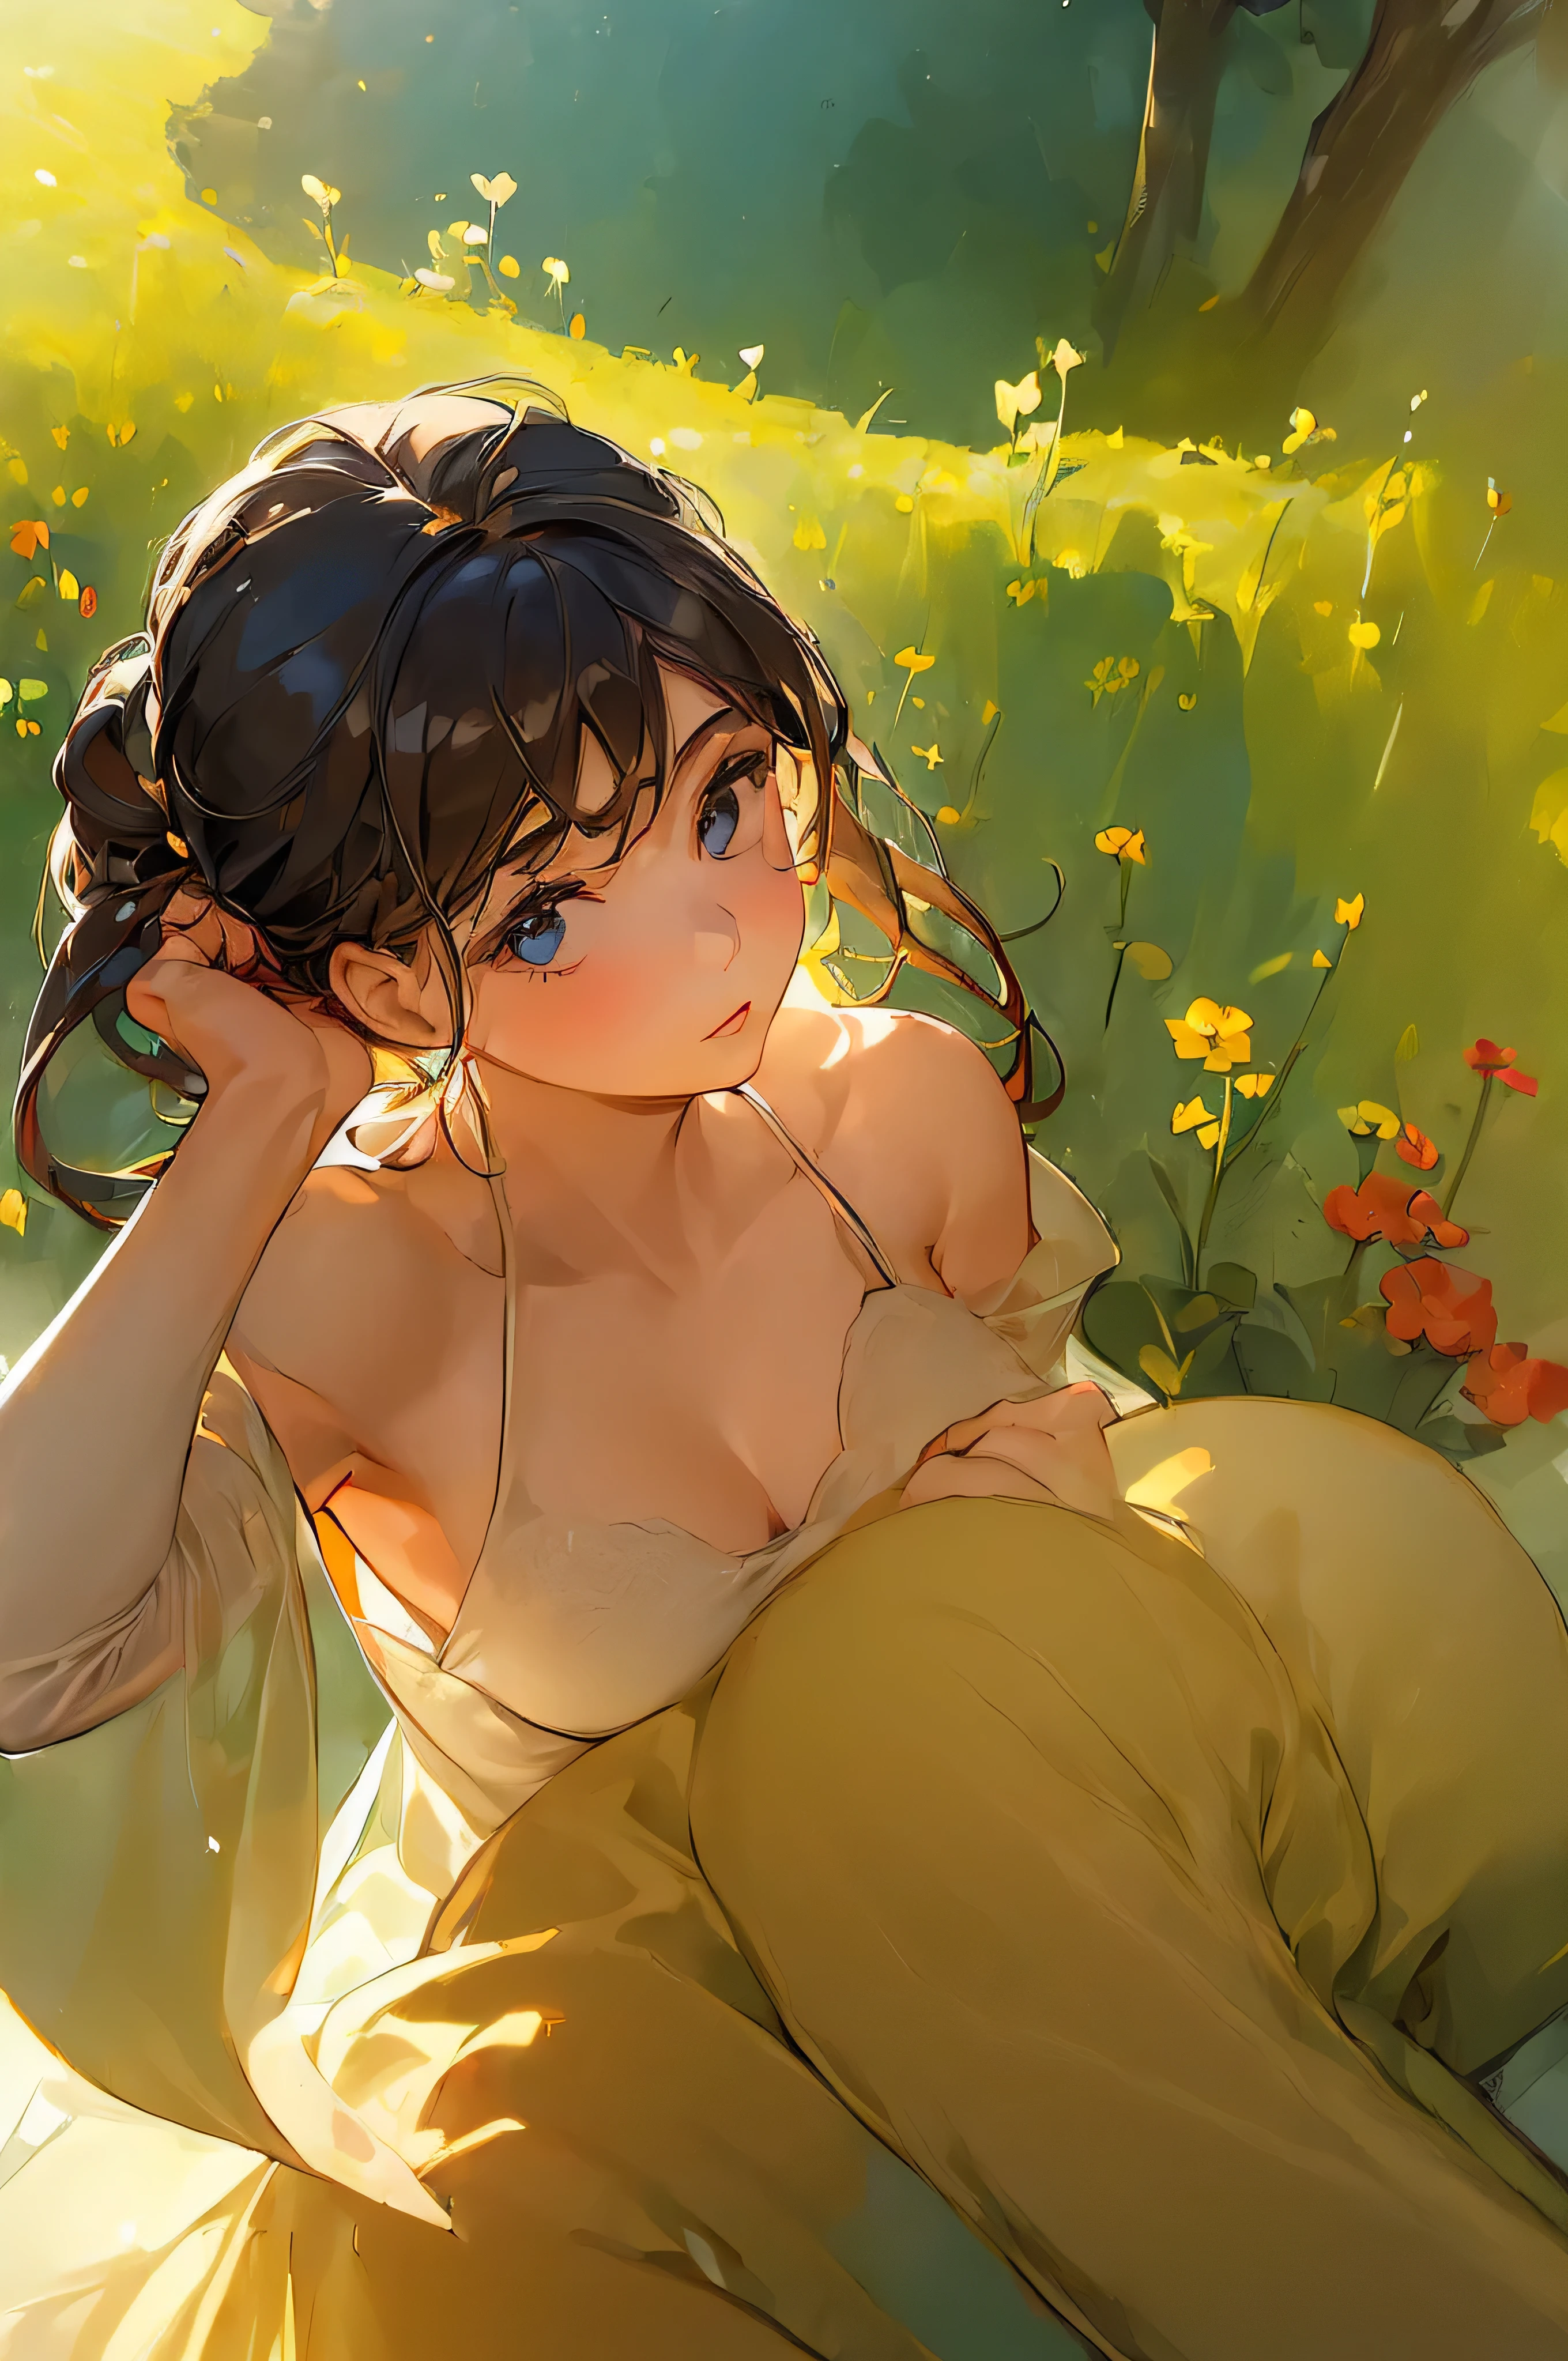 (a girl:2) in a (garden) (surrounded by nature), (wearing a colorful dress) and (holding a paintbrush:1.1). The scene is (bathed in warm sunlight:1.2) and there are (vibrant flowers:1.1) blooming all around. The girl is (focusing intently:1.1) on her (canvas:1.1), where she is (painting a beautiful landscape). The details of the girl's (expressive eyes, rosy cheeks, and flowing hair) are (exquisitely captured:1.2). Her (brushstrokes:1.1) are (delicate and precise) as she adds (fine details) to the painting. The (colors are vivid and rich:1.1), with a (harmonious blend of warm and cool tones) that enhance the overall beauty of the artwork. The (light and shadows) play gracefully across the canvas, giving the scene (depth and dimension). This masterpiece exhibits (best quality, high-resolution, and ultra-realistic:1.2) details, making it a true work of art worthy of admiration. The girl's artistic talent is evident in every (carefully chosen stroke), showcasing her (creativity and passion).